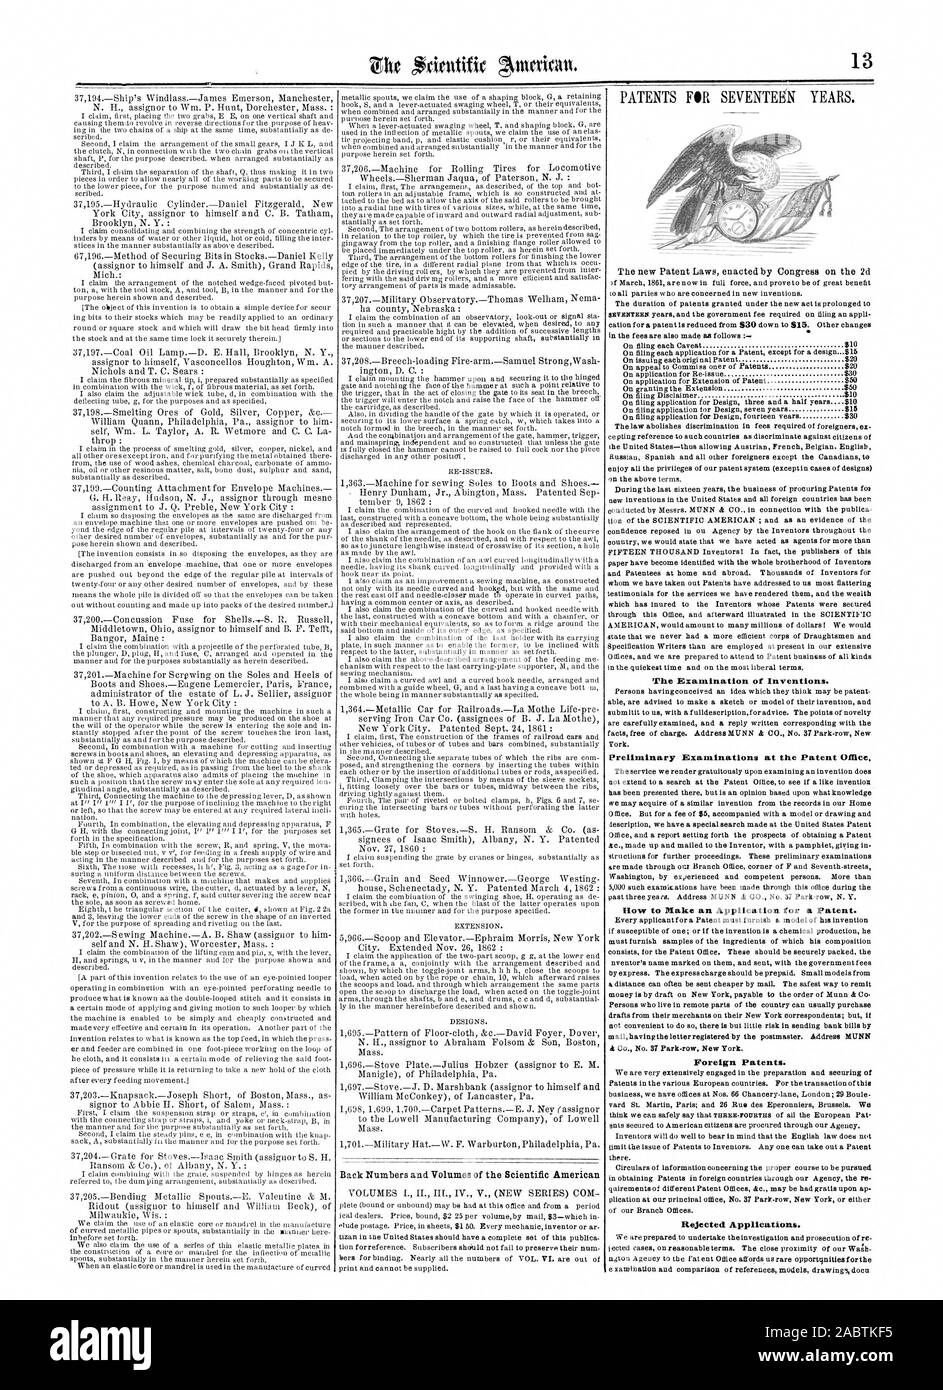 The Examination of Inventions. Preliminary Examinations at the Patent °Bice. Row to Make an Application for a Patent. Foreign Patents. Rejected Applications., scientific american, 1863-01-03 Stock Photo